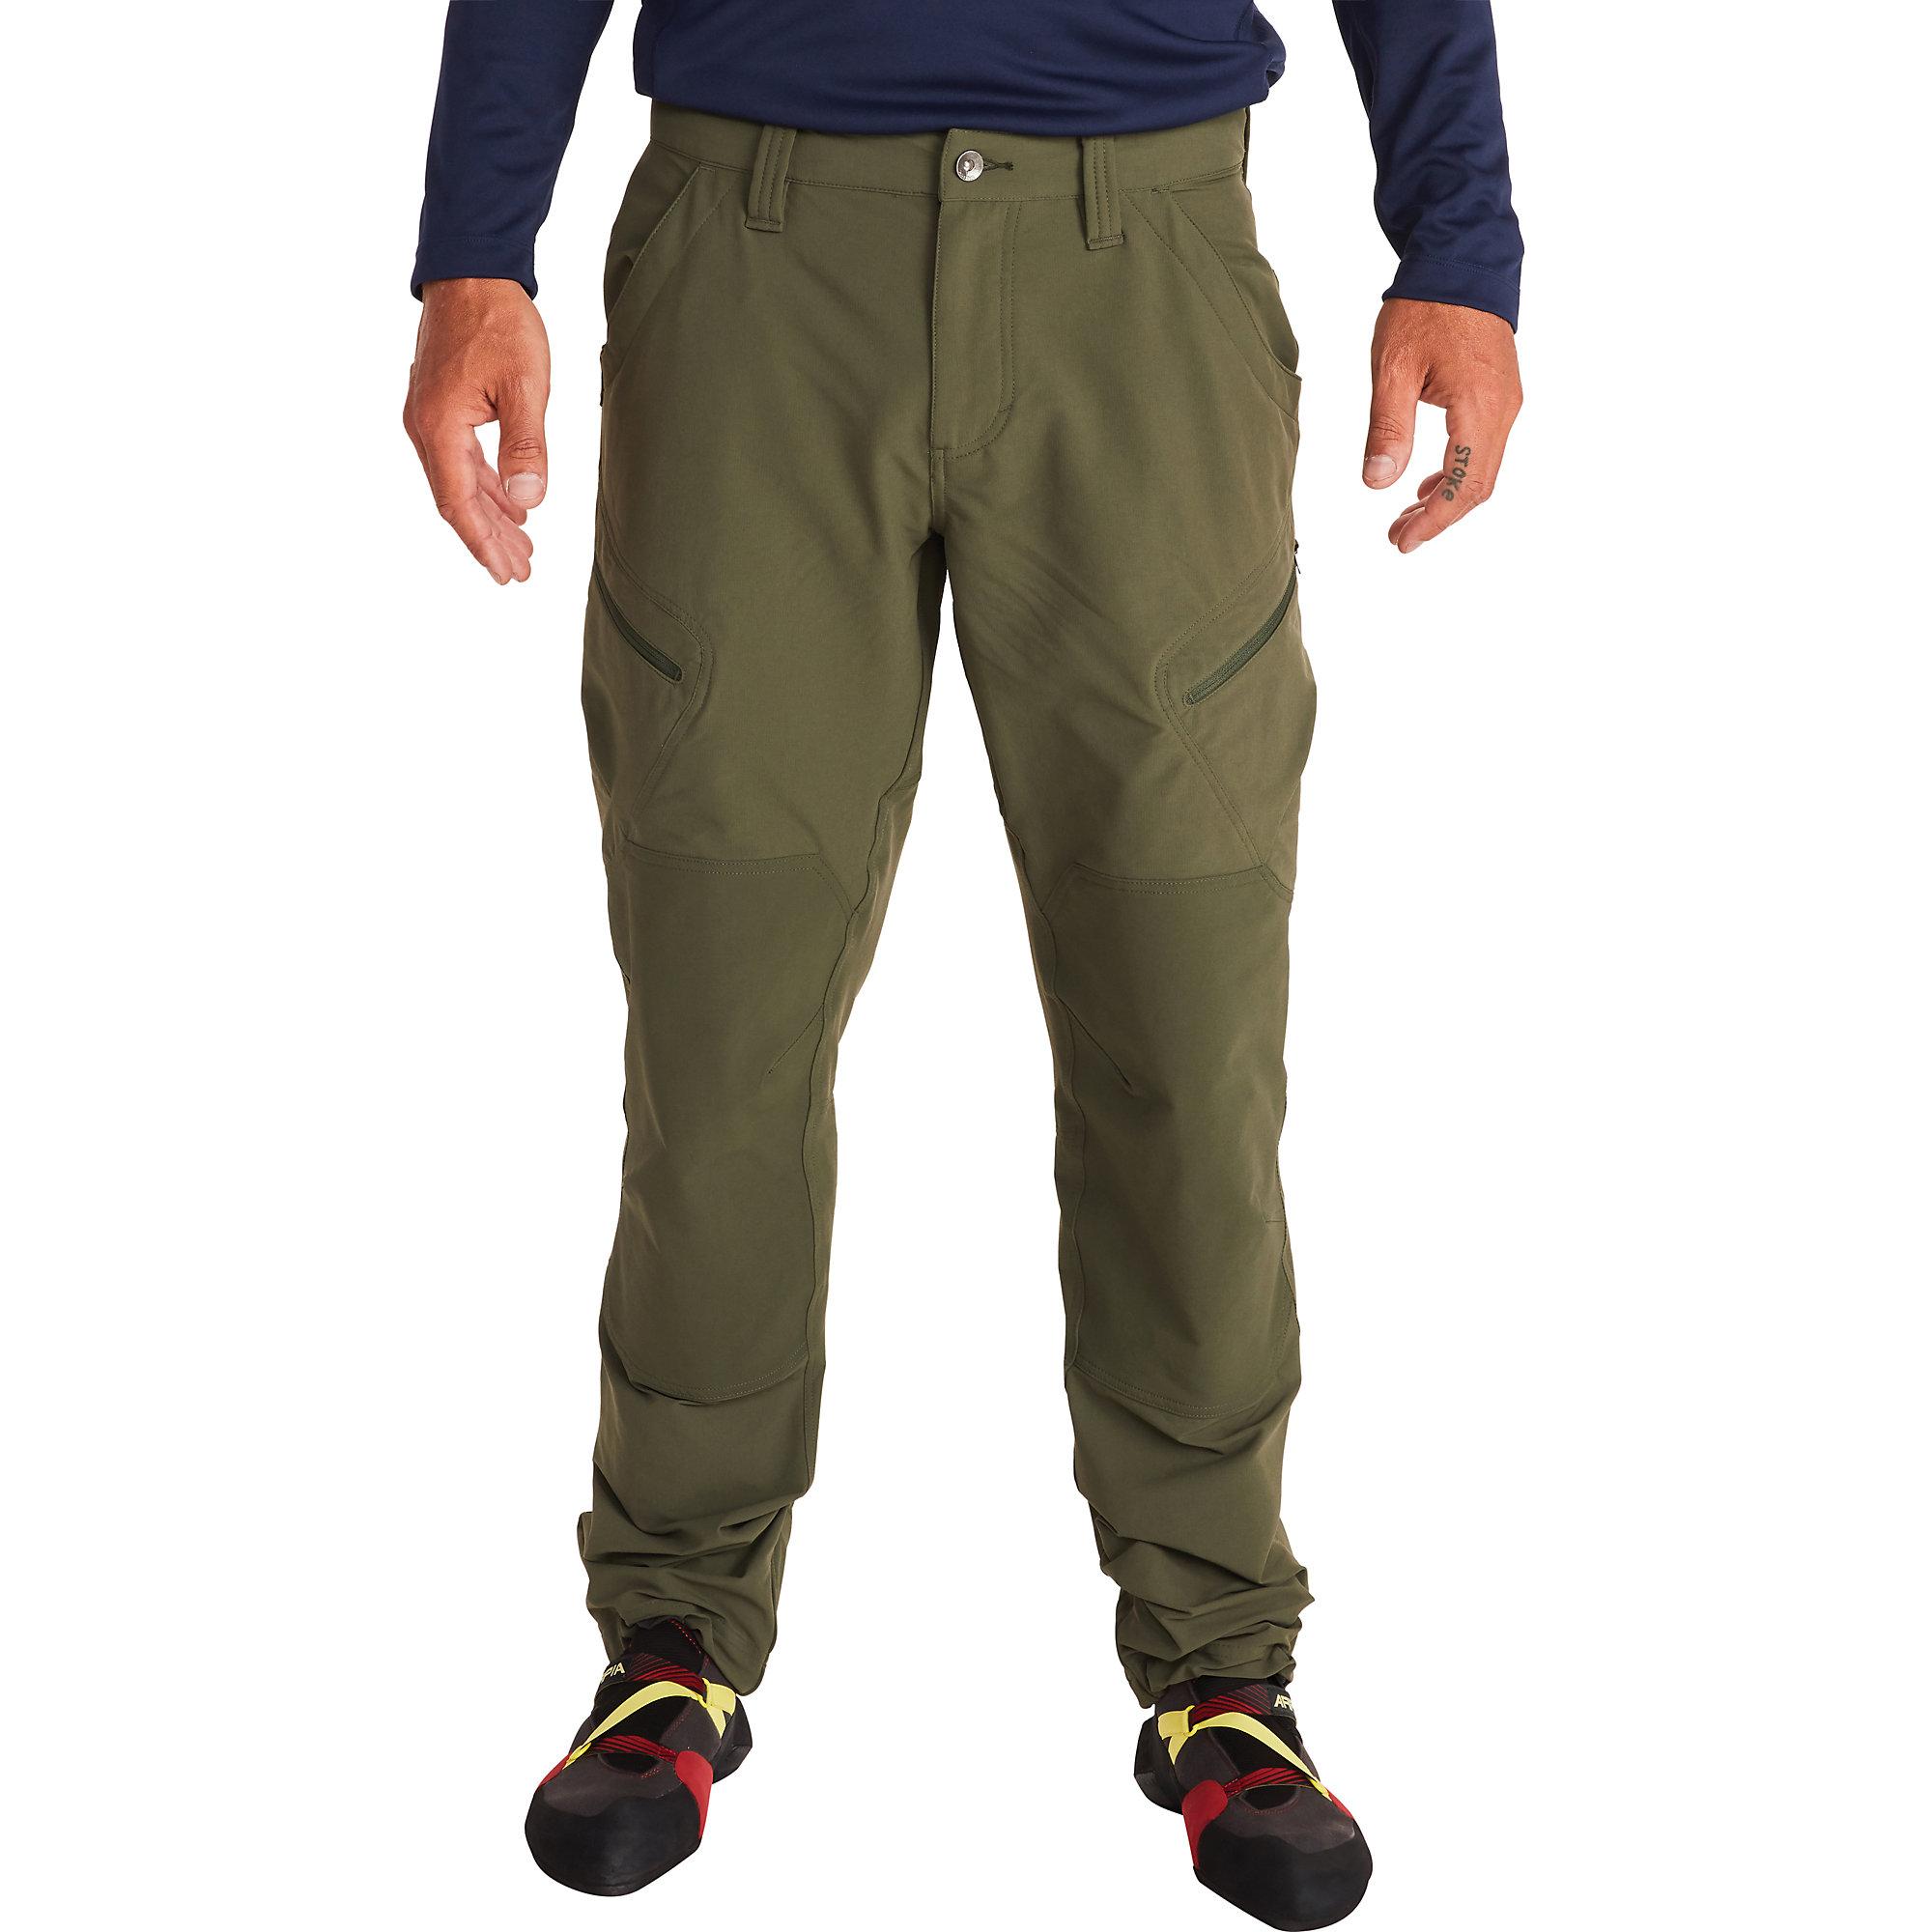 Marmot Synthetic Highland Pant in Green for Men - Lyst